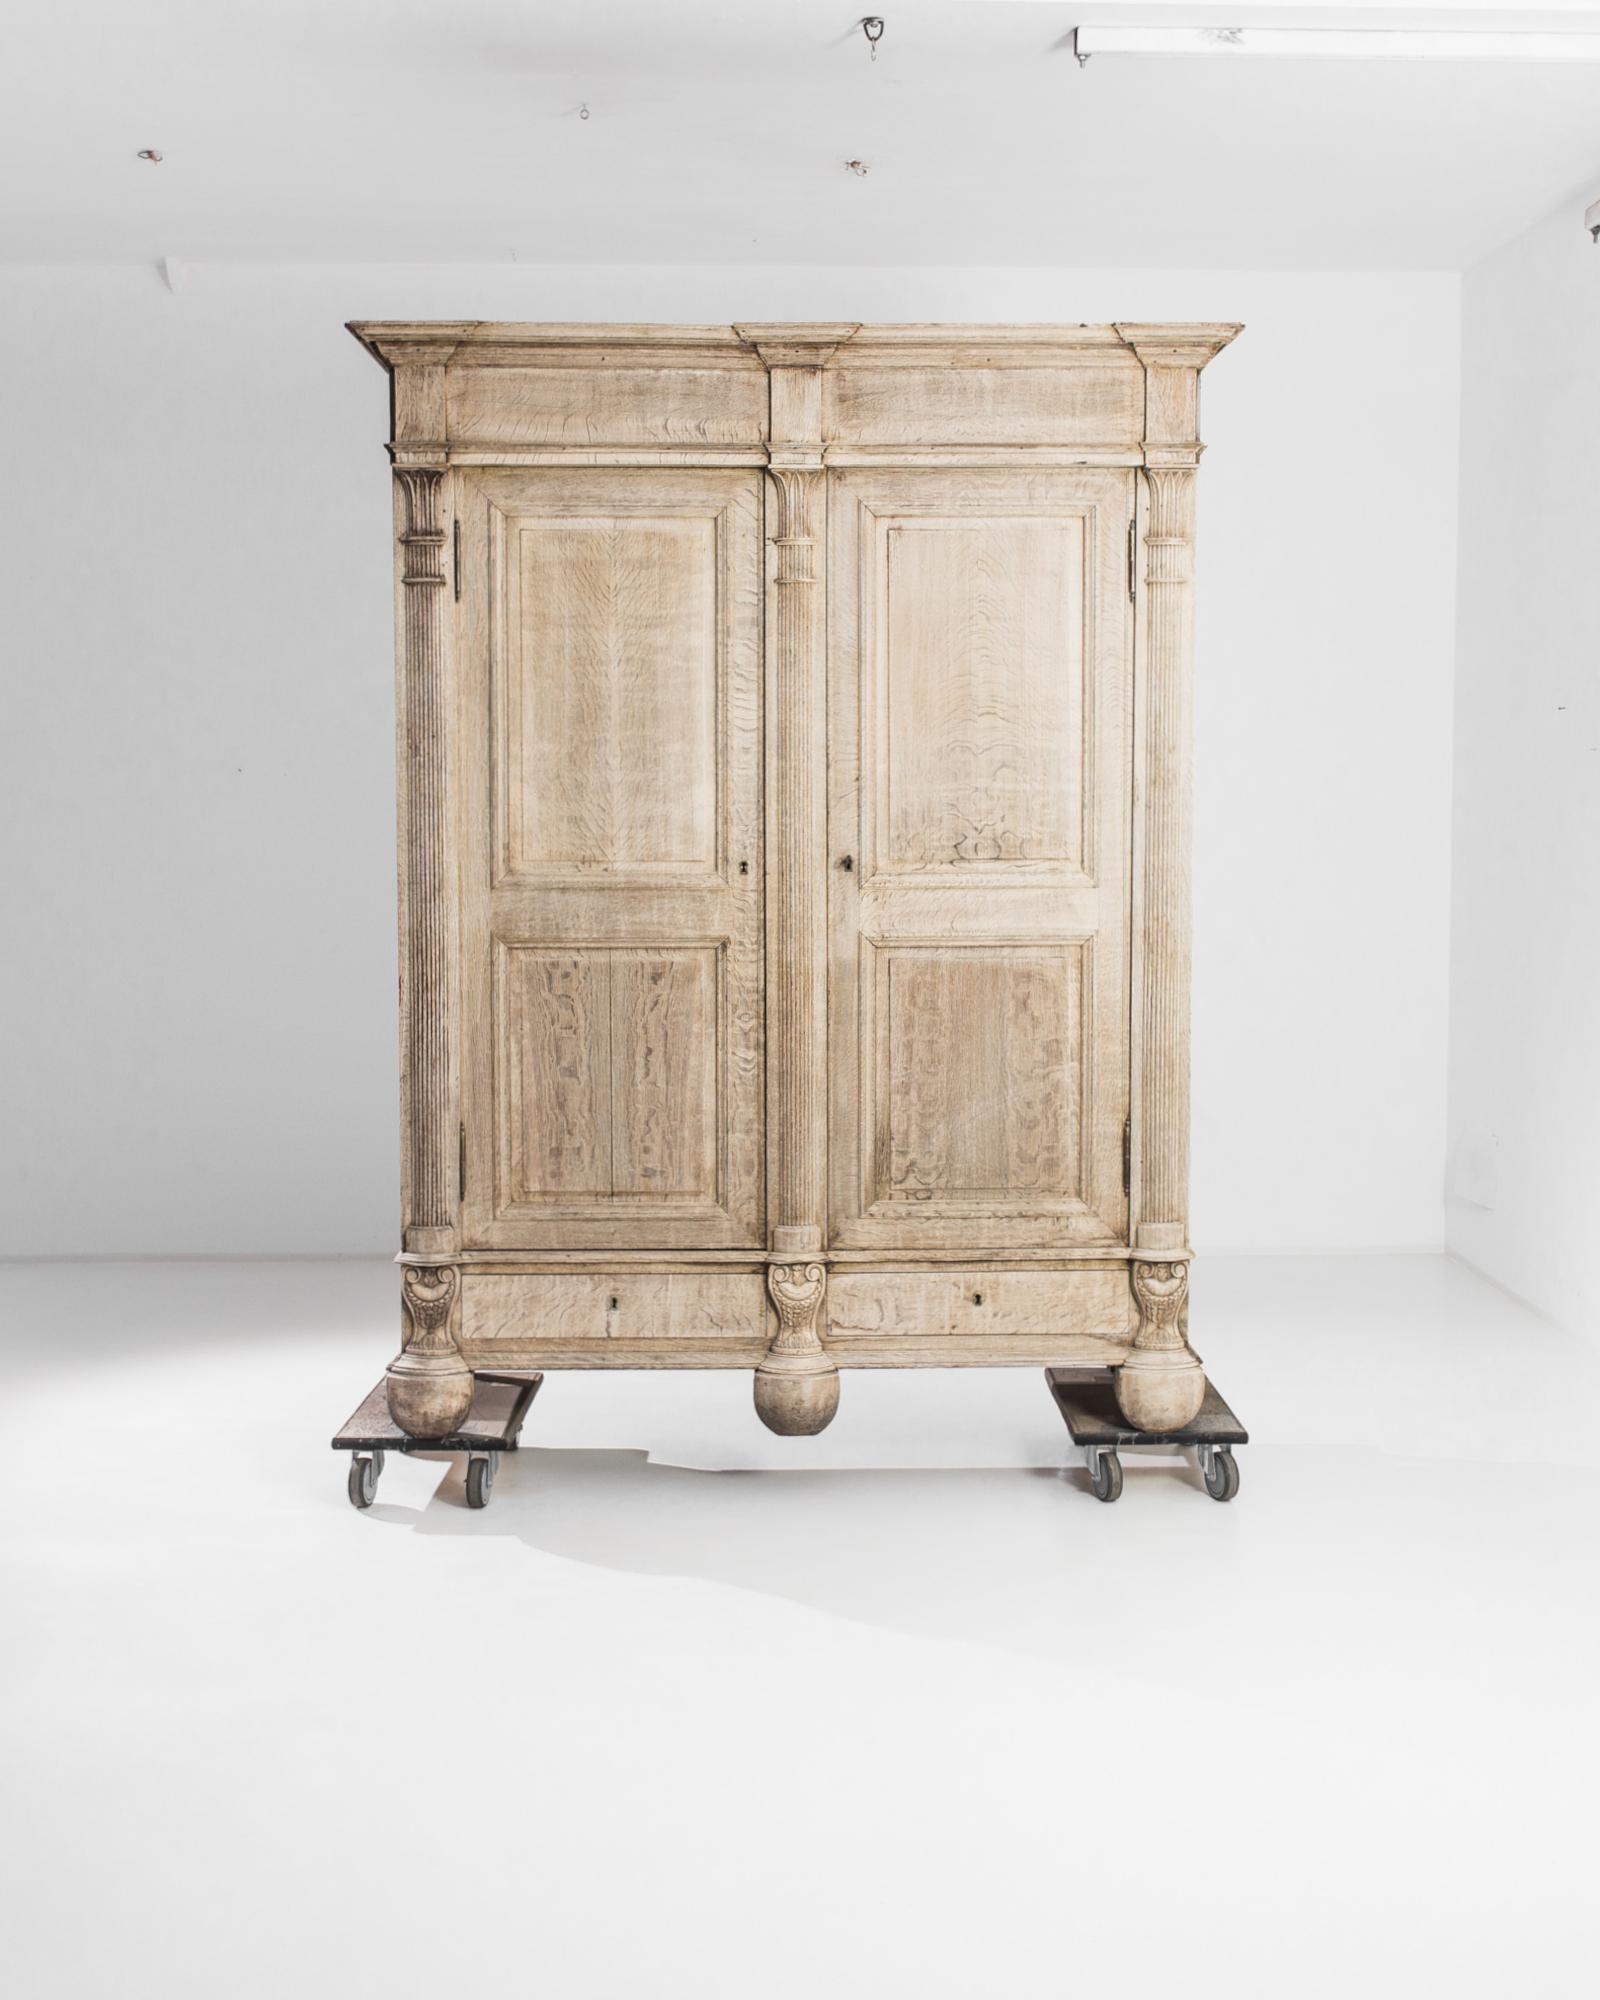 An oak cabinet from 1850s France with a stately neo-classical aesthetic. Paneled doors are framed by fluted Egyptian columns, crowned by a capital of fanning palm leaves. At the base, carved victory urns, wreathed with laurel, sit atop stocky